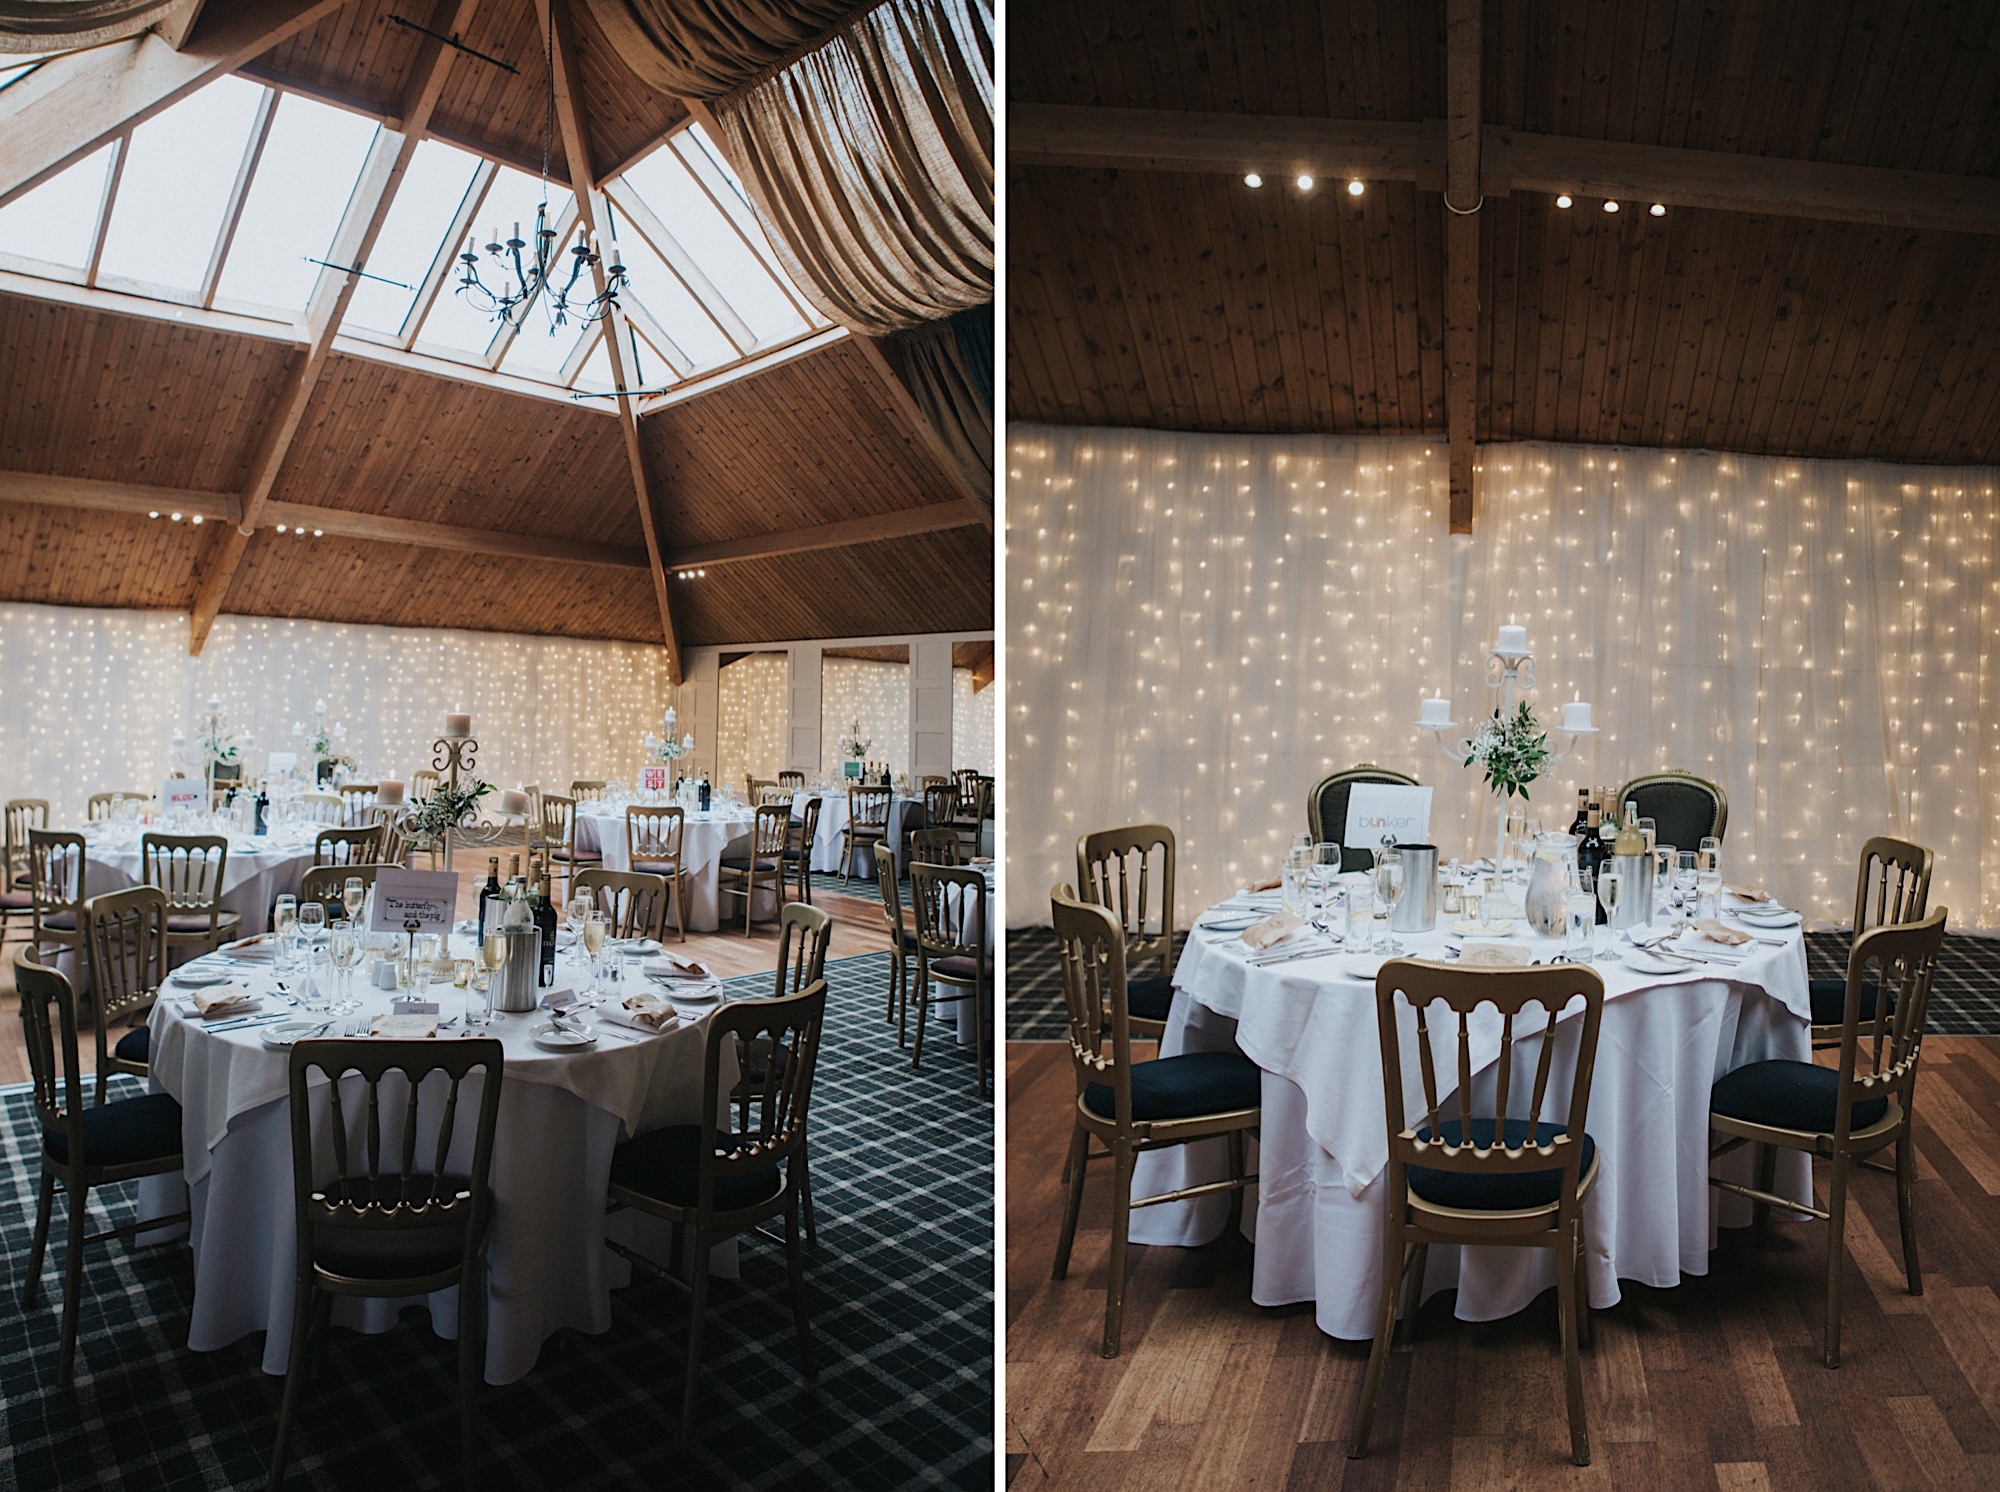 the cruin loch lomand rustic wedding details, tables names after glasgow bars